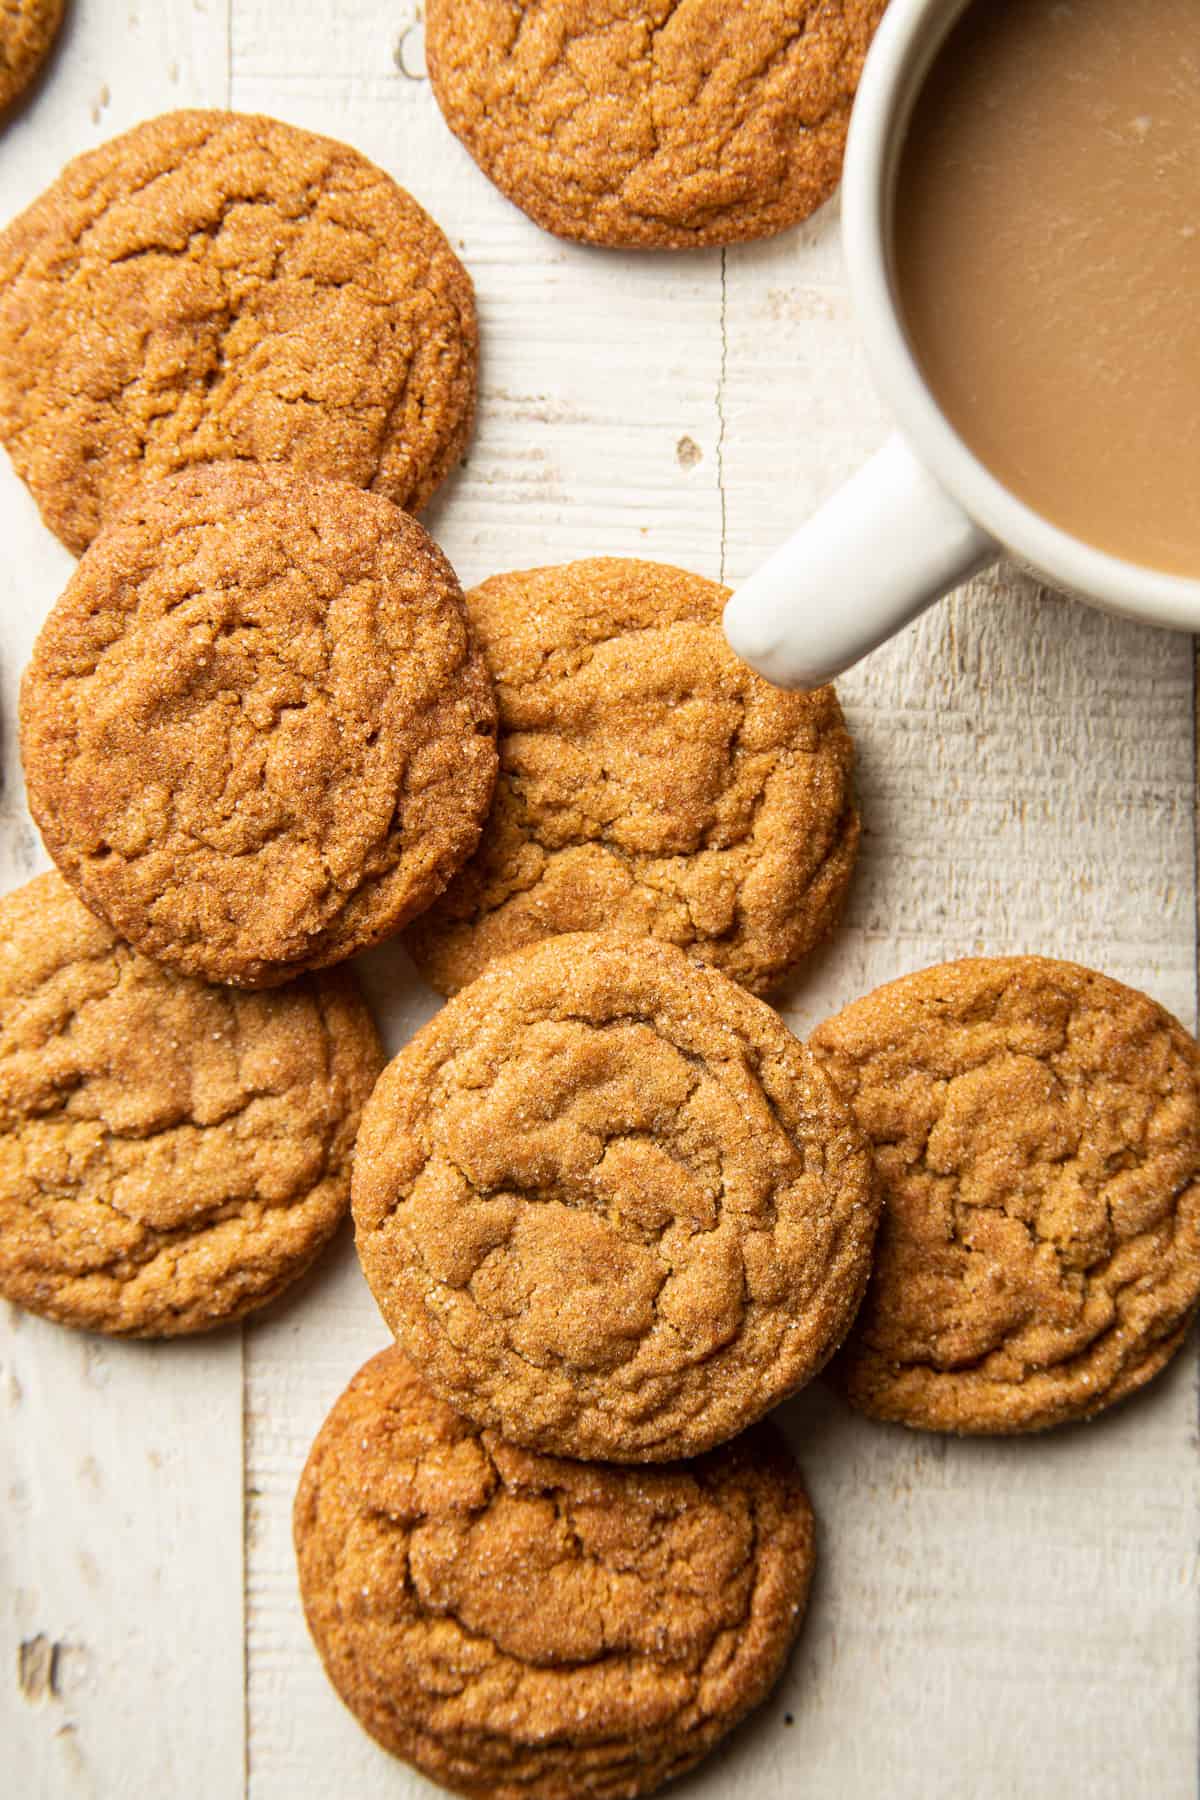 Vegan Ginger Molasses Cookies and coffee cup on a white wooden surface.